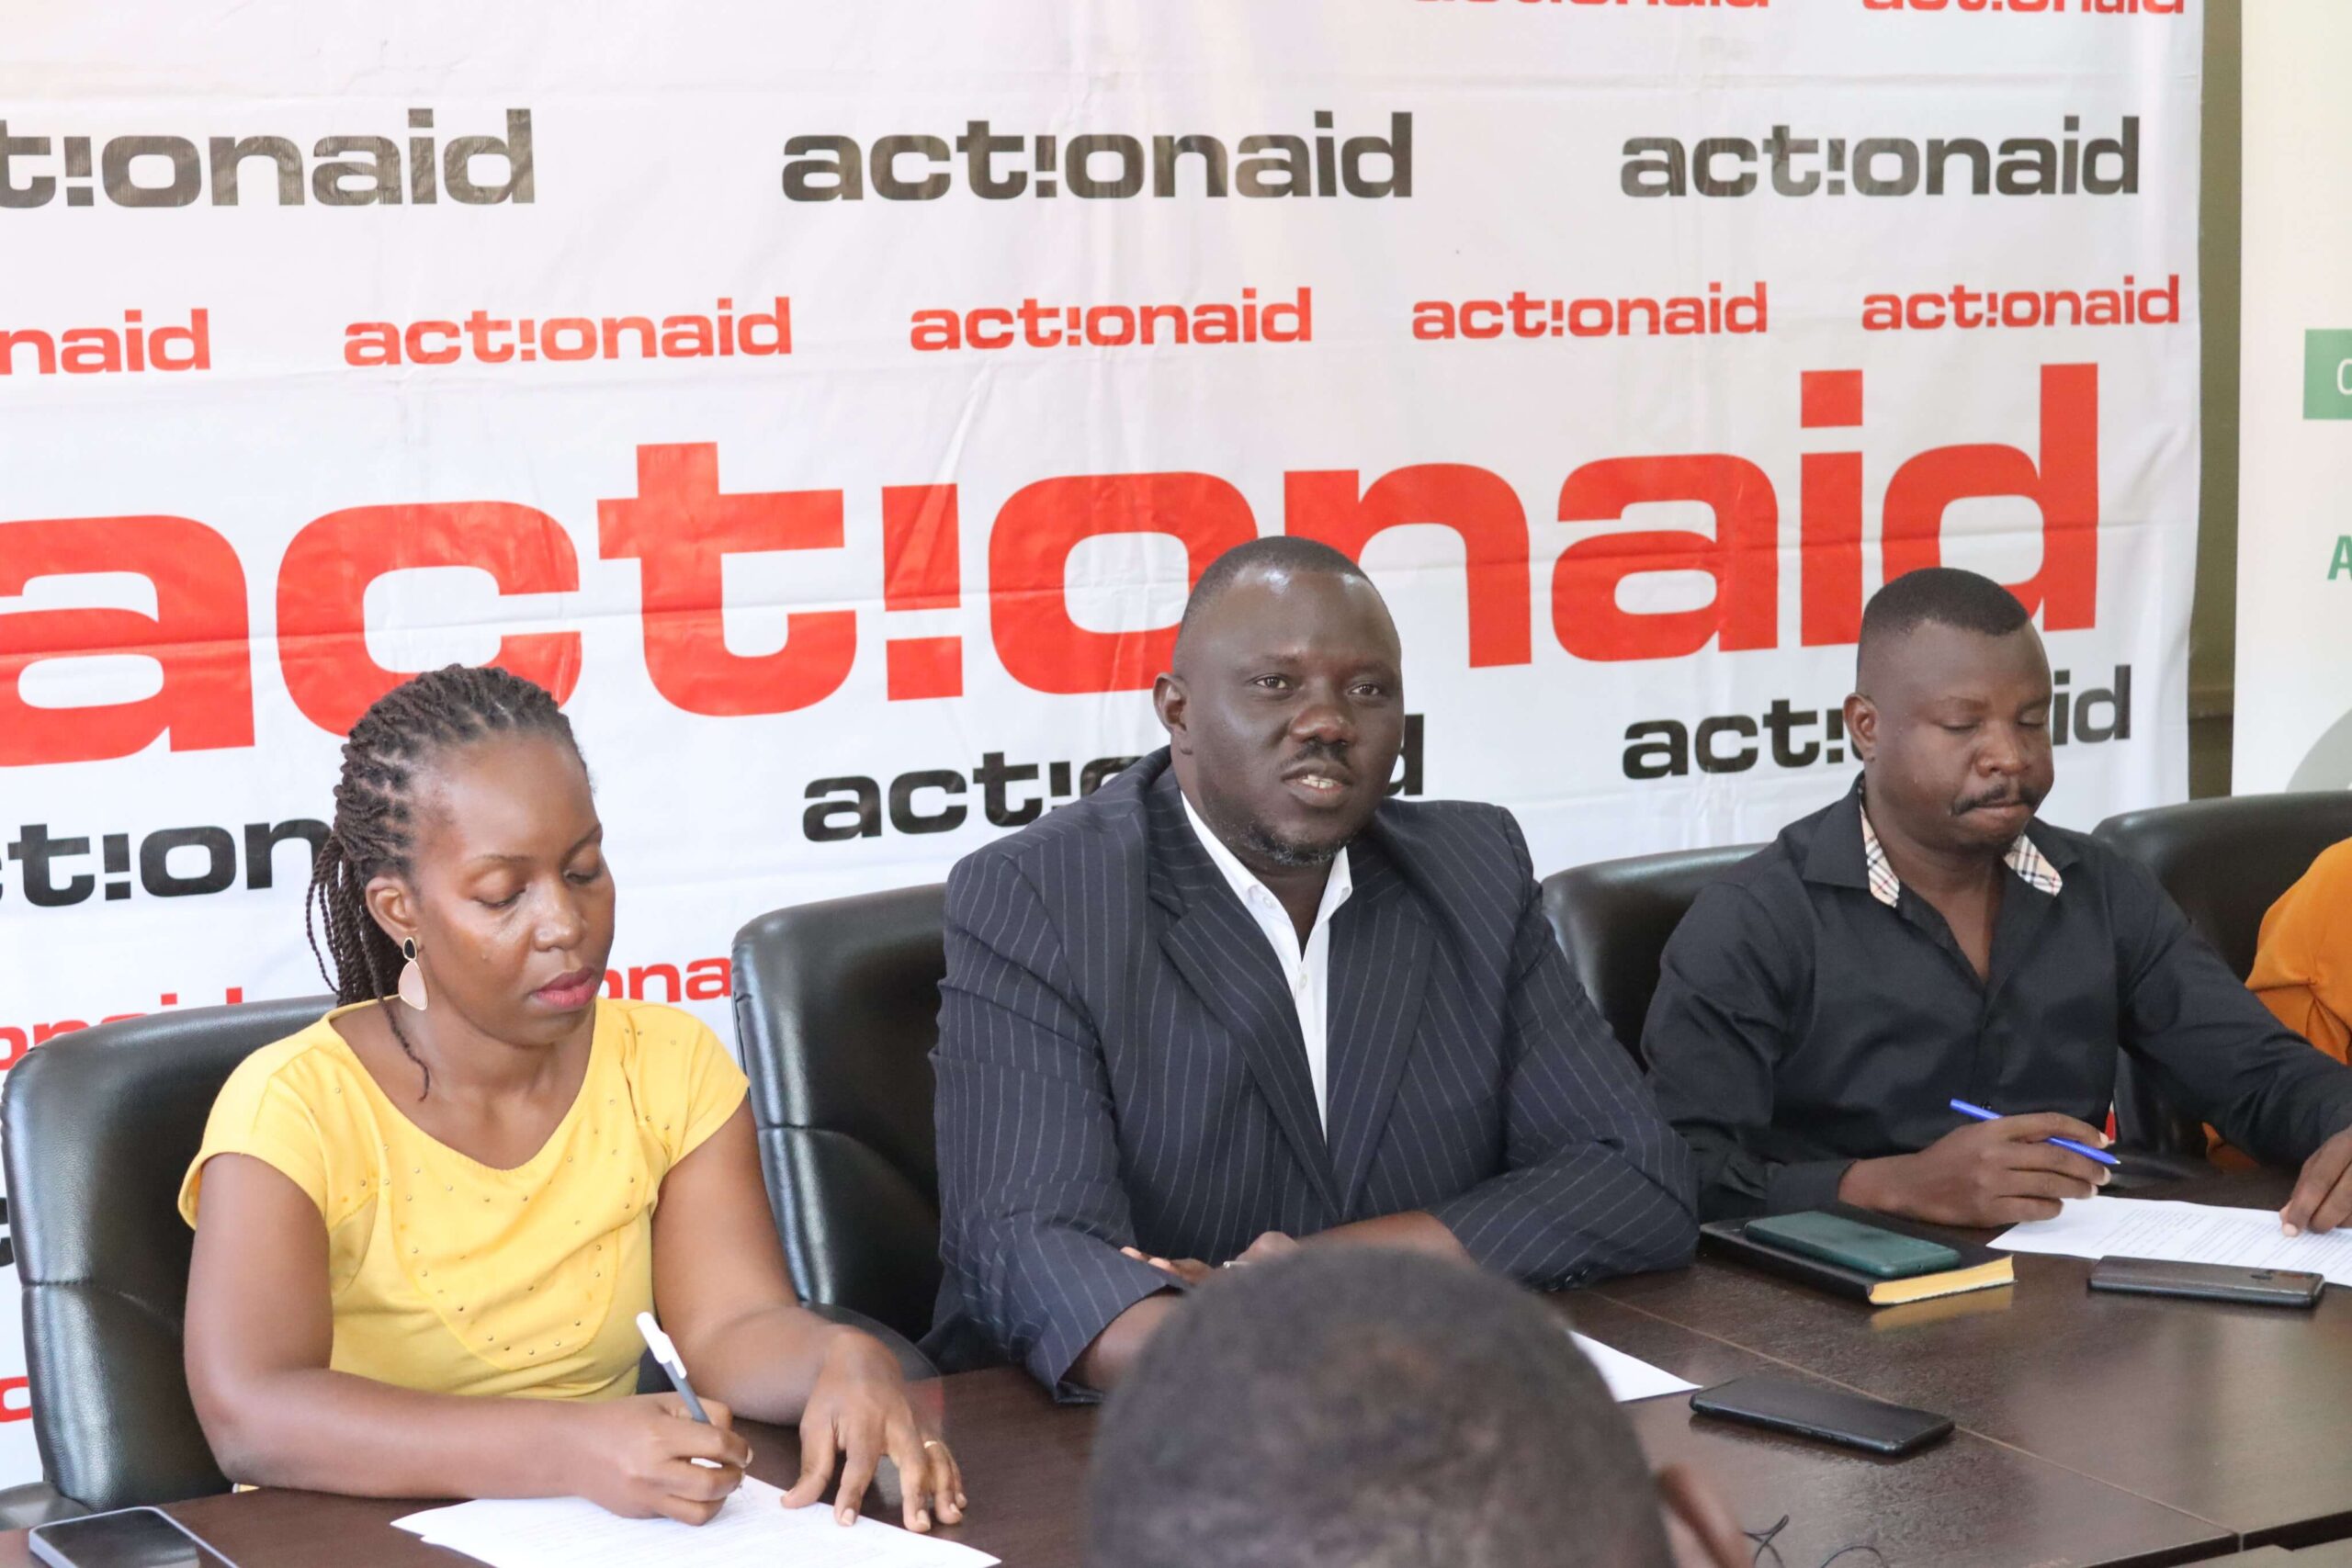 National Citizens Integrity Awards Launched by ActionAid to Recognize Anti-Corruption Efforts